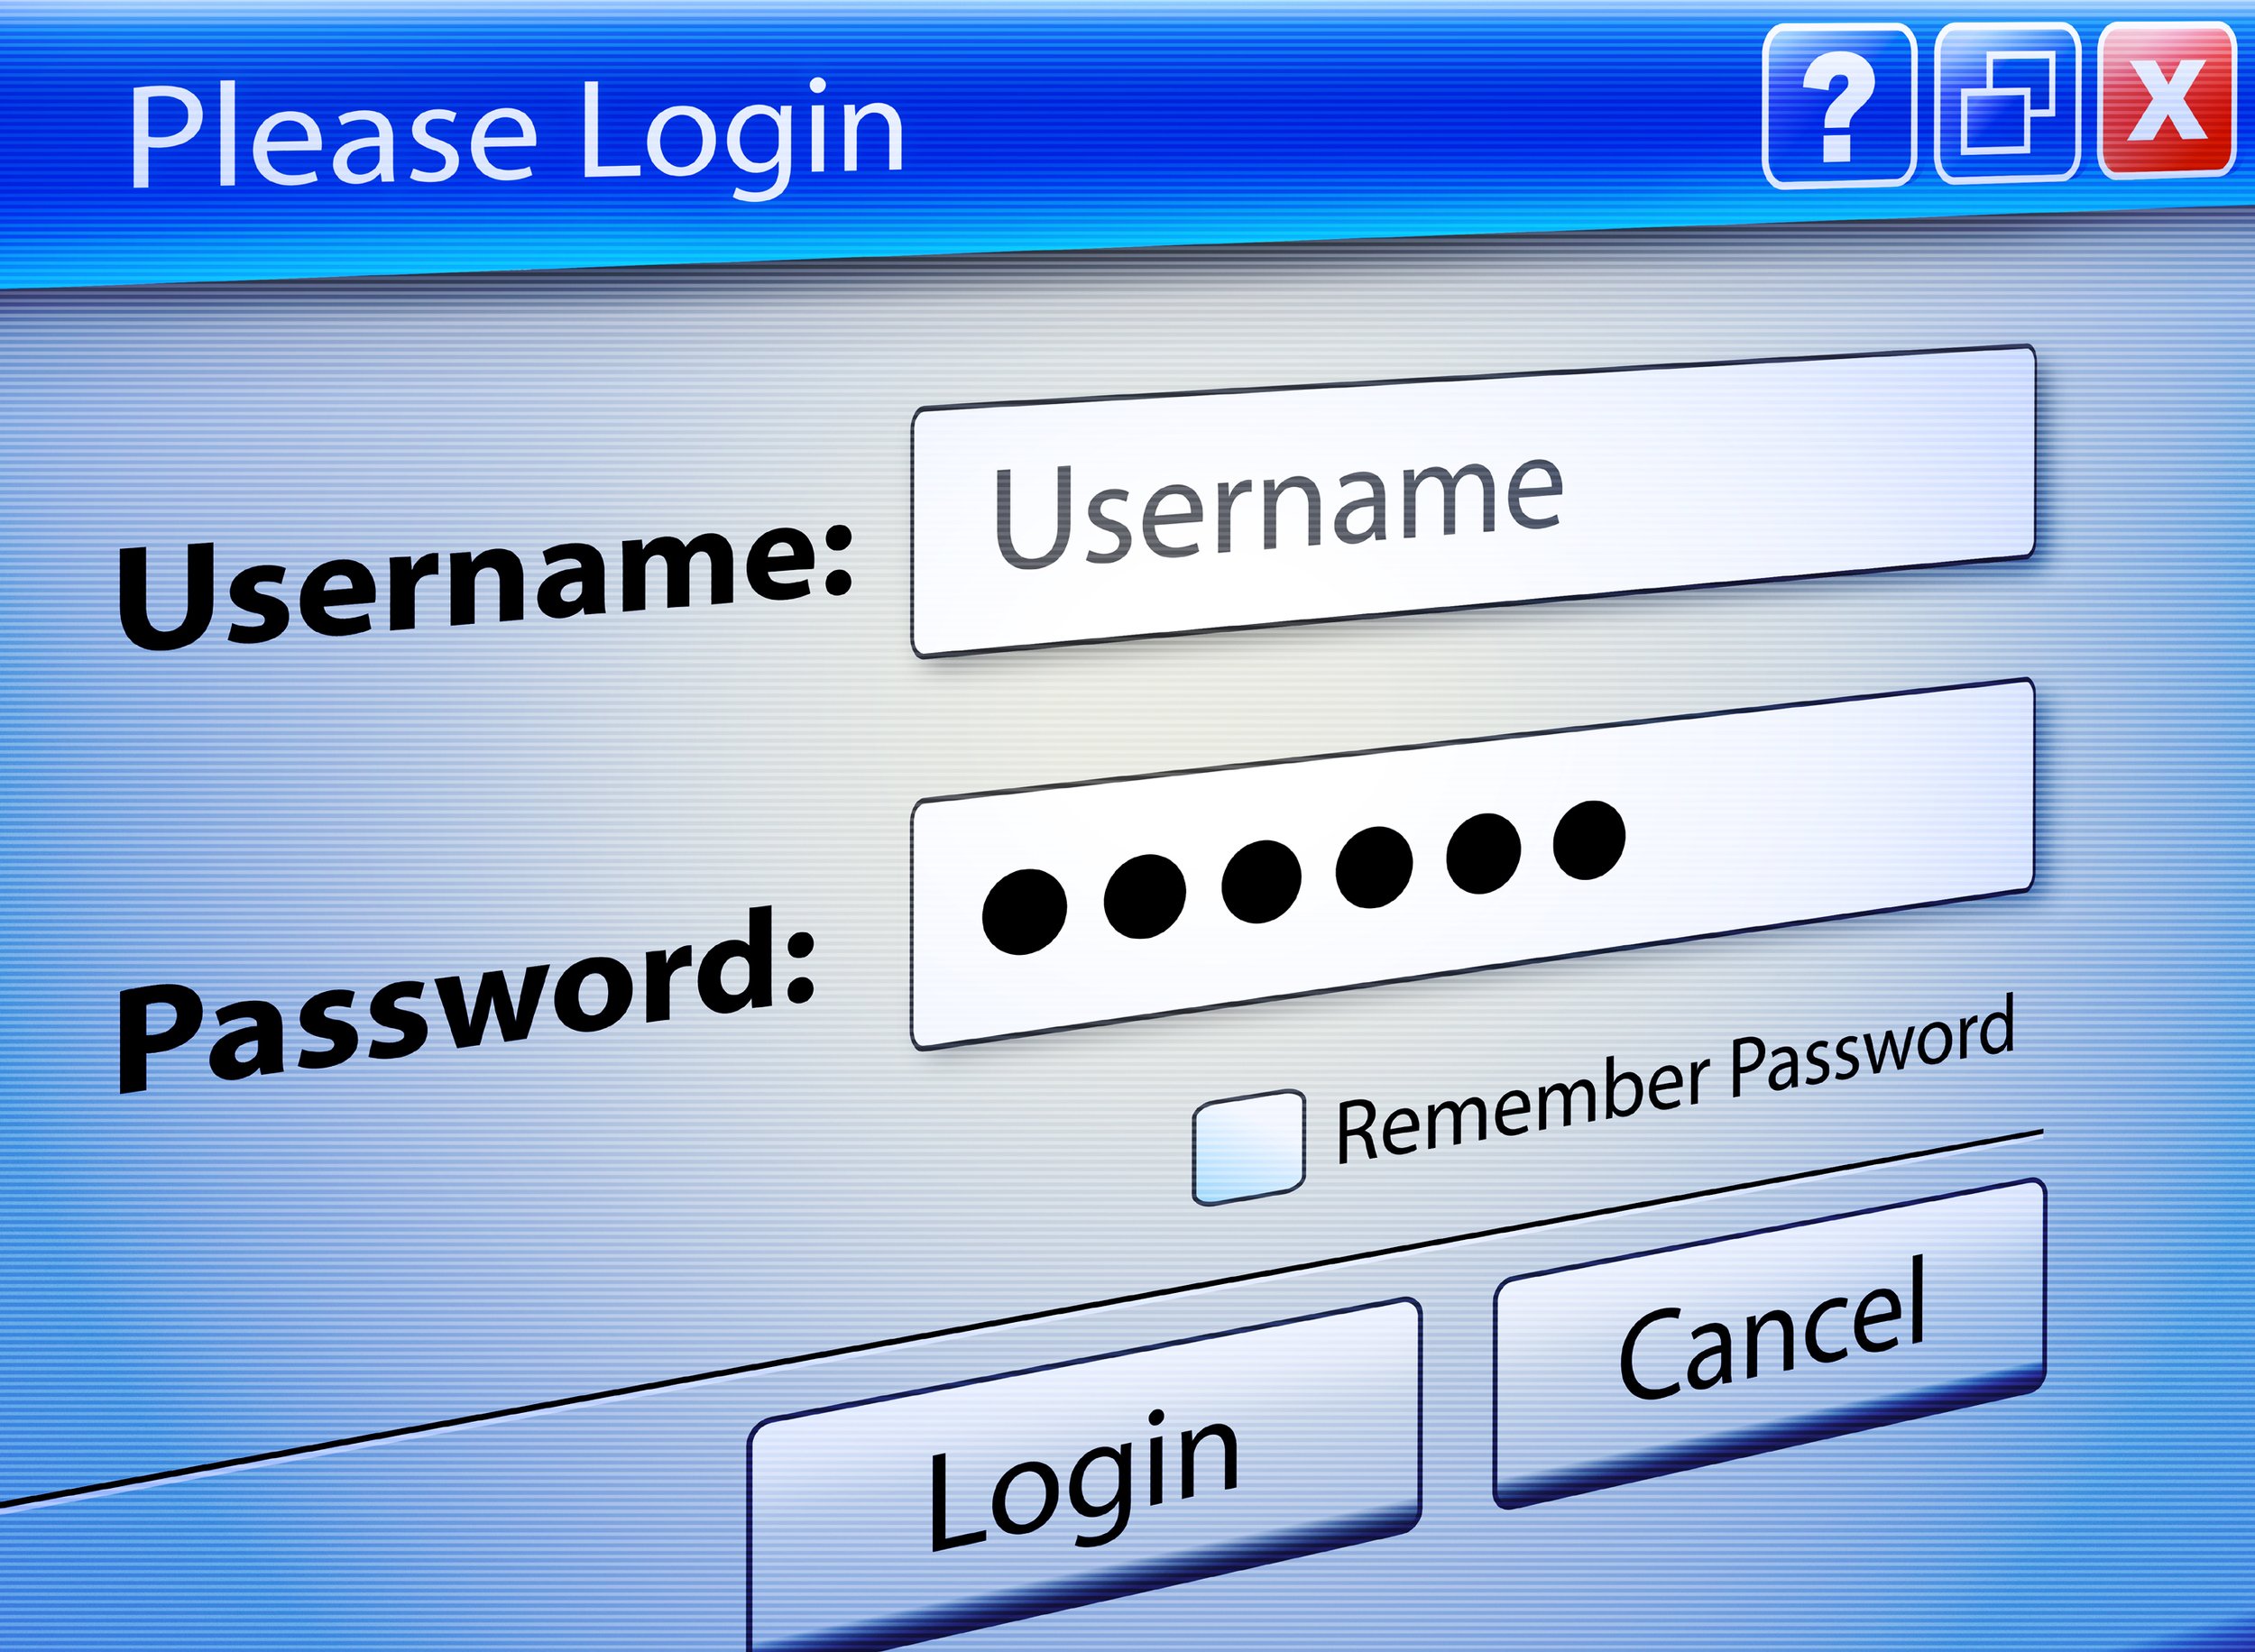 Login webpage with username and password